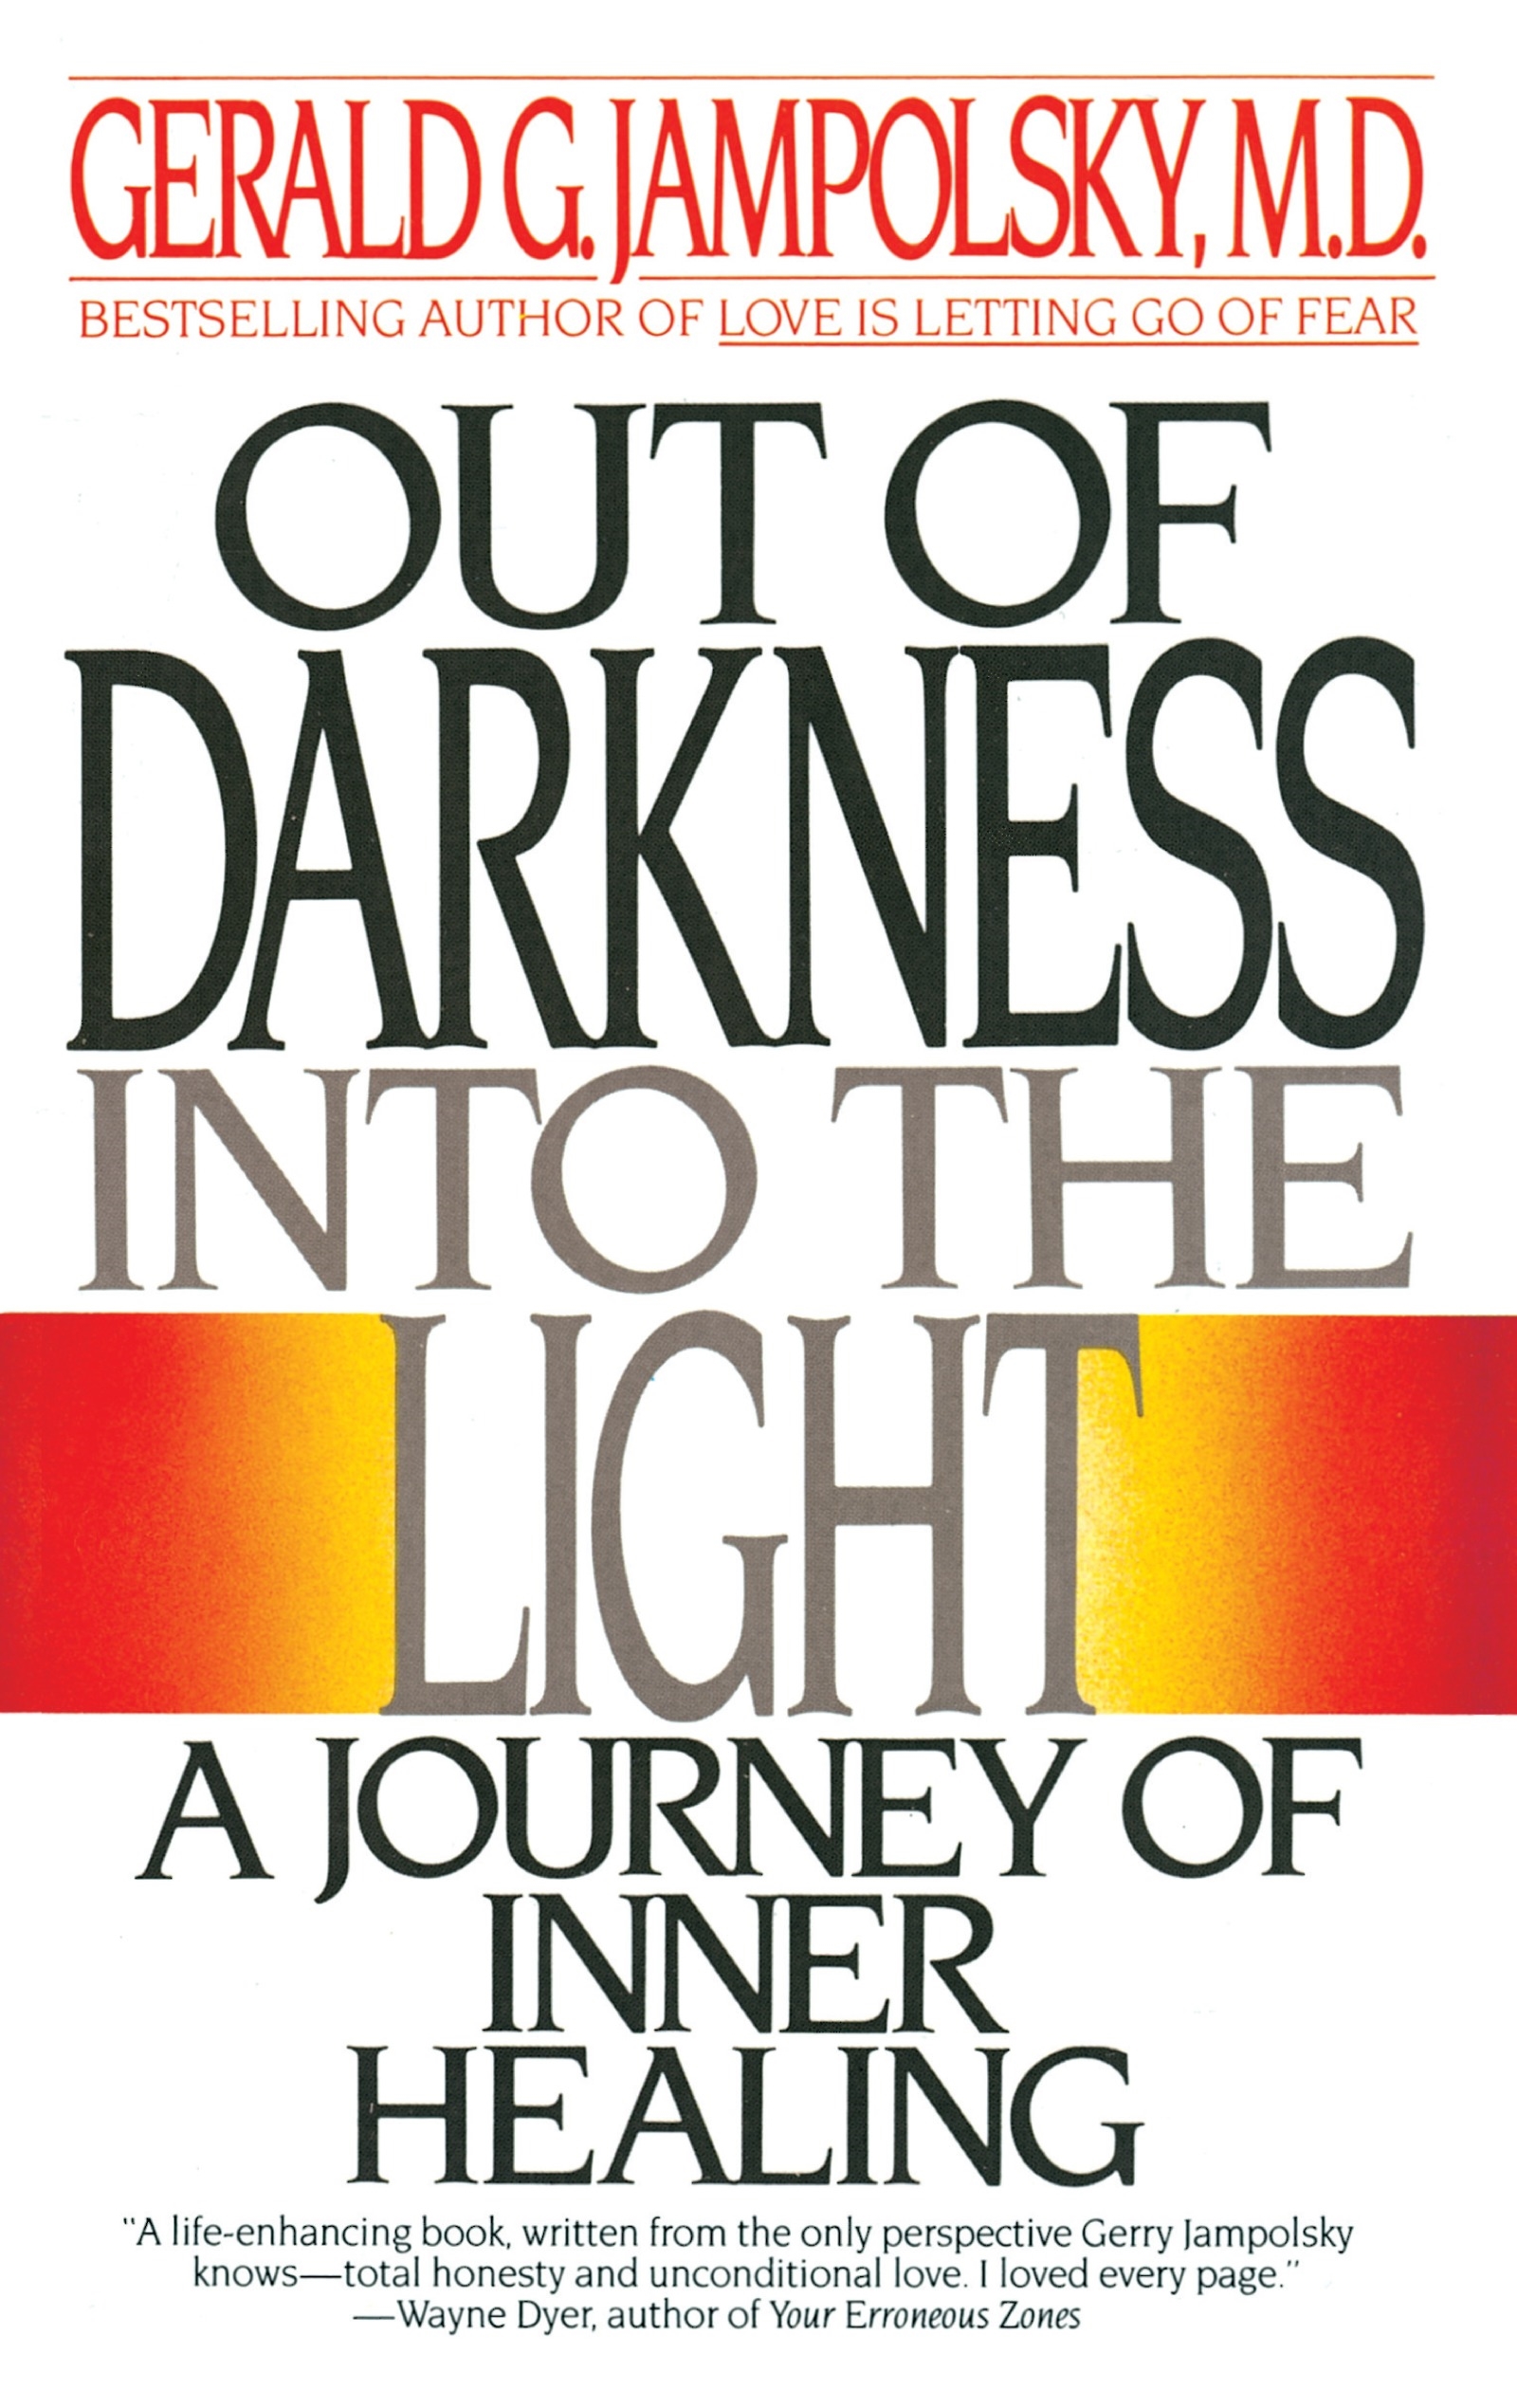 Out Of The Darkness Into Light by Gerald Jampolsky ...